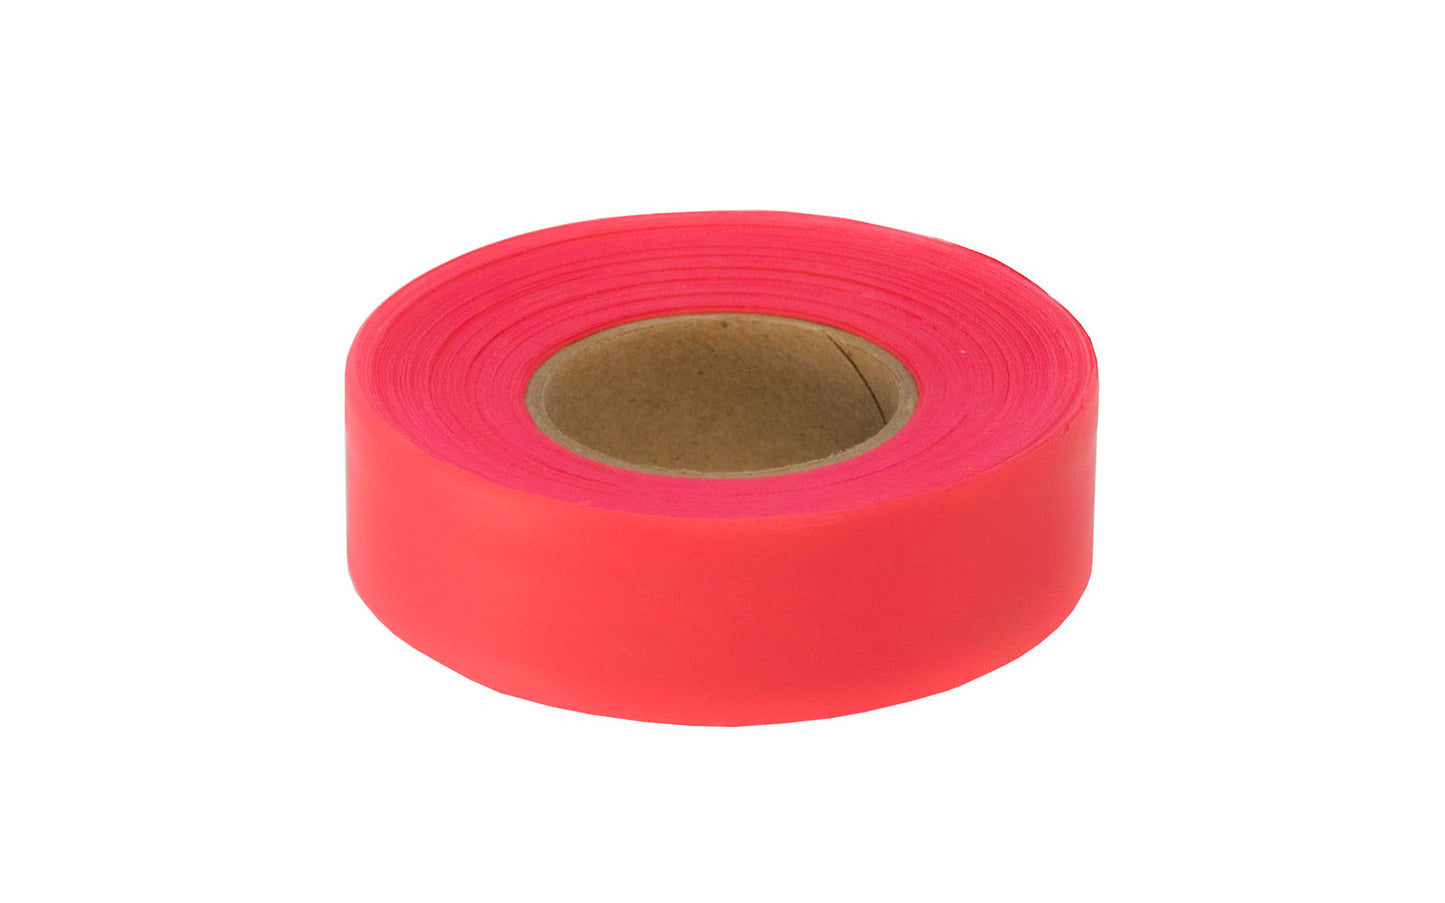 This Swanson Red Glo (Flourescent Pink Color) Flagging Tape 1" x 150' is durable plastic tape that remains pliant in cold weather. Easy to tear & tie off. Tape is ideal for surveying projects, marking trails, & similar tasks, etc. Model RF115RG. 038987643354